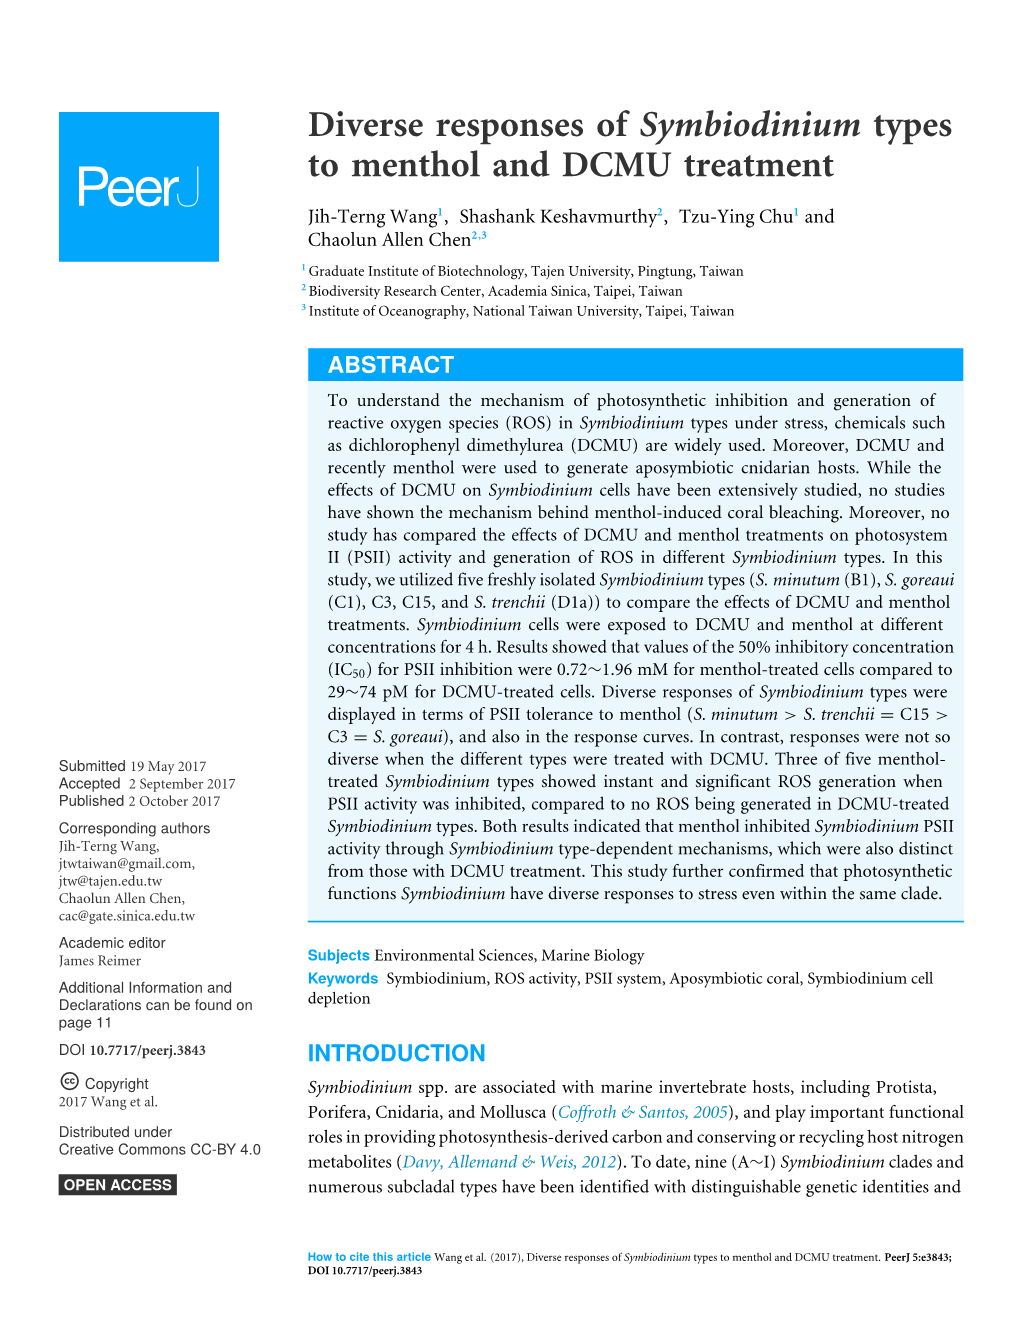 Diverse Responses of Symbiodinium Types to Menthol and DCMU Treatment